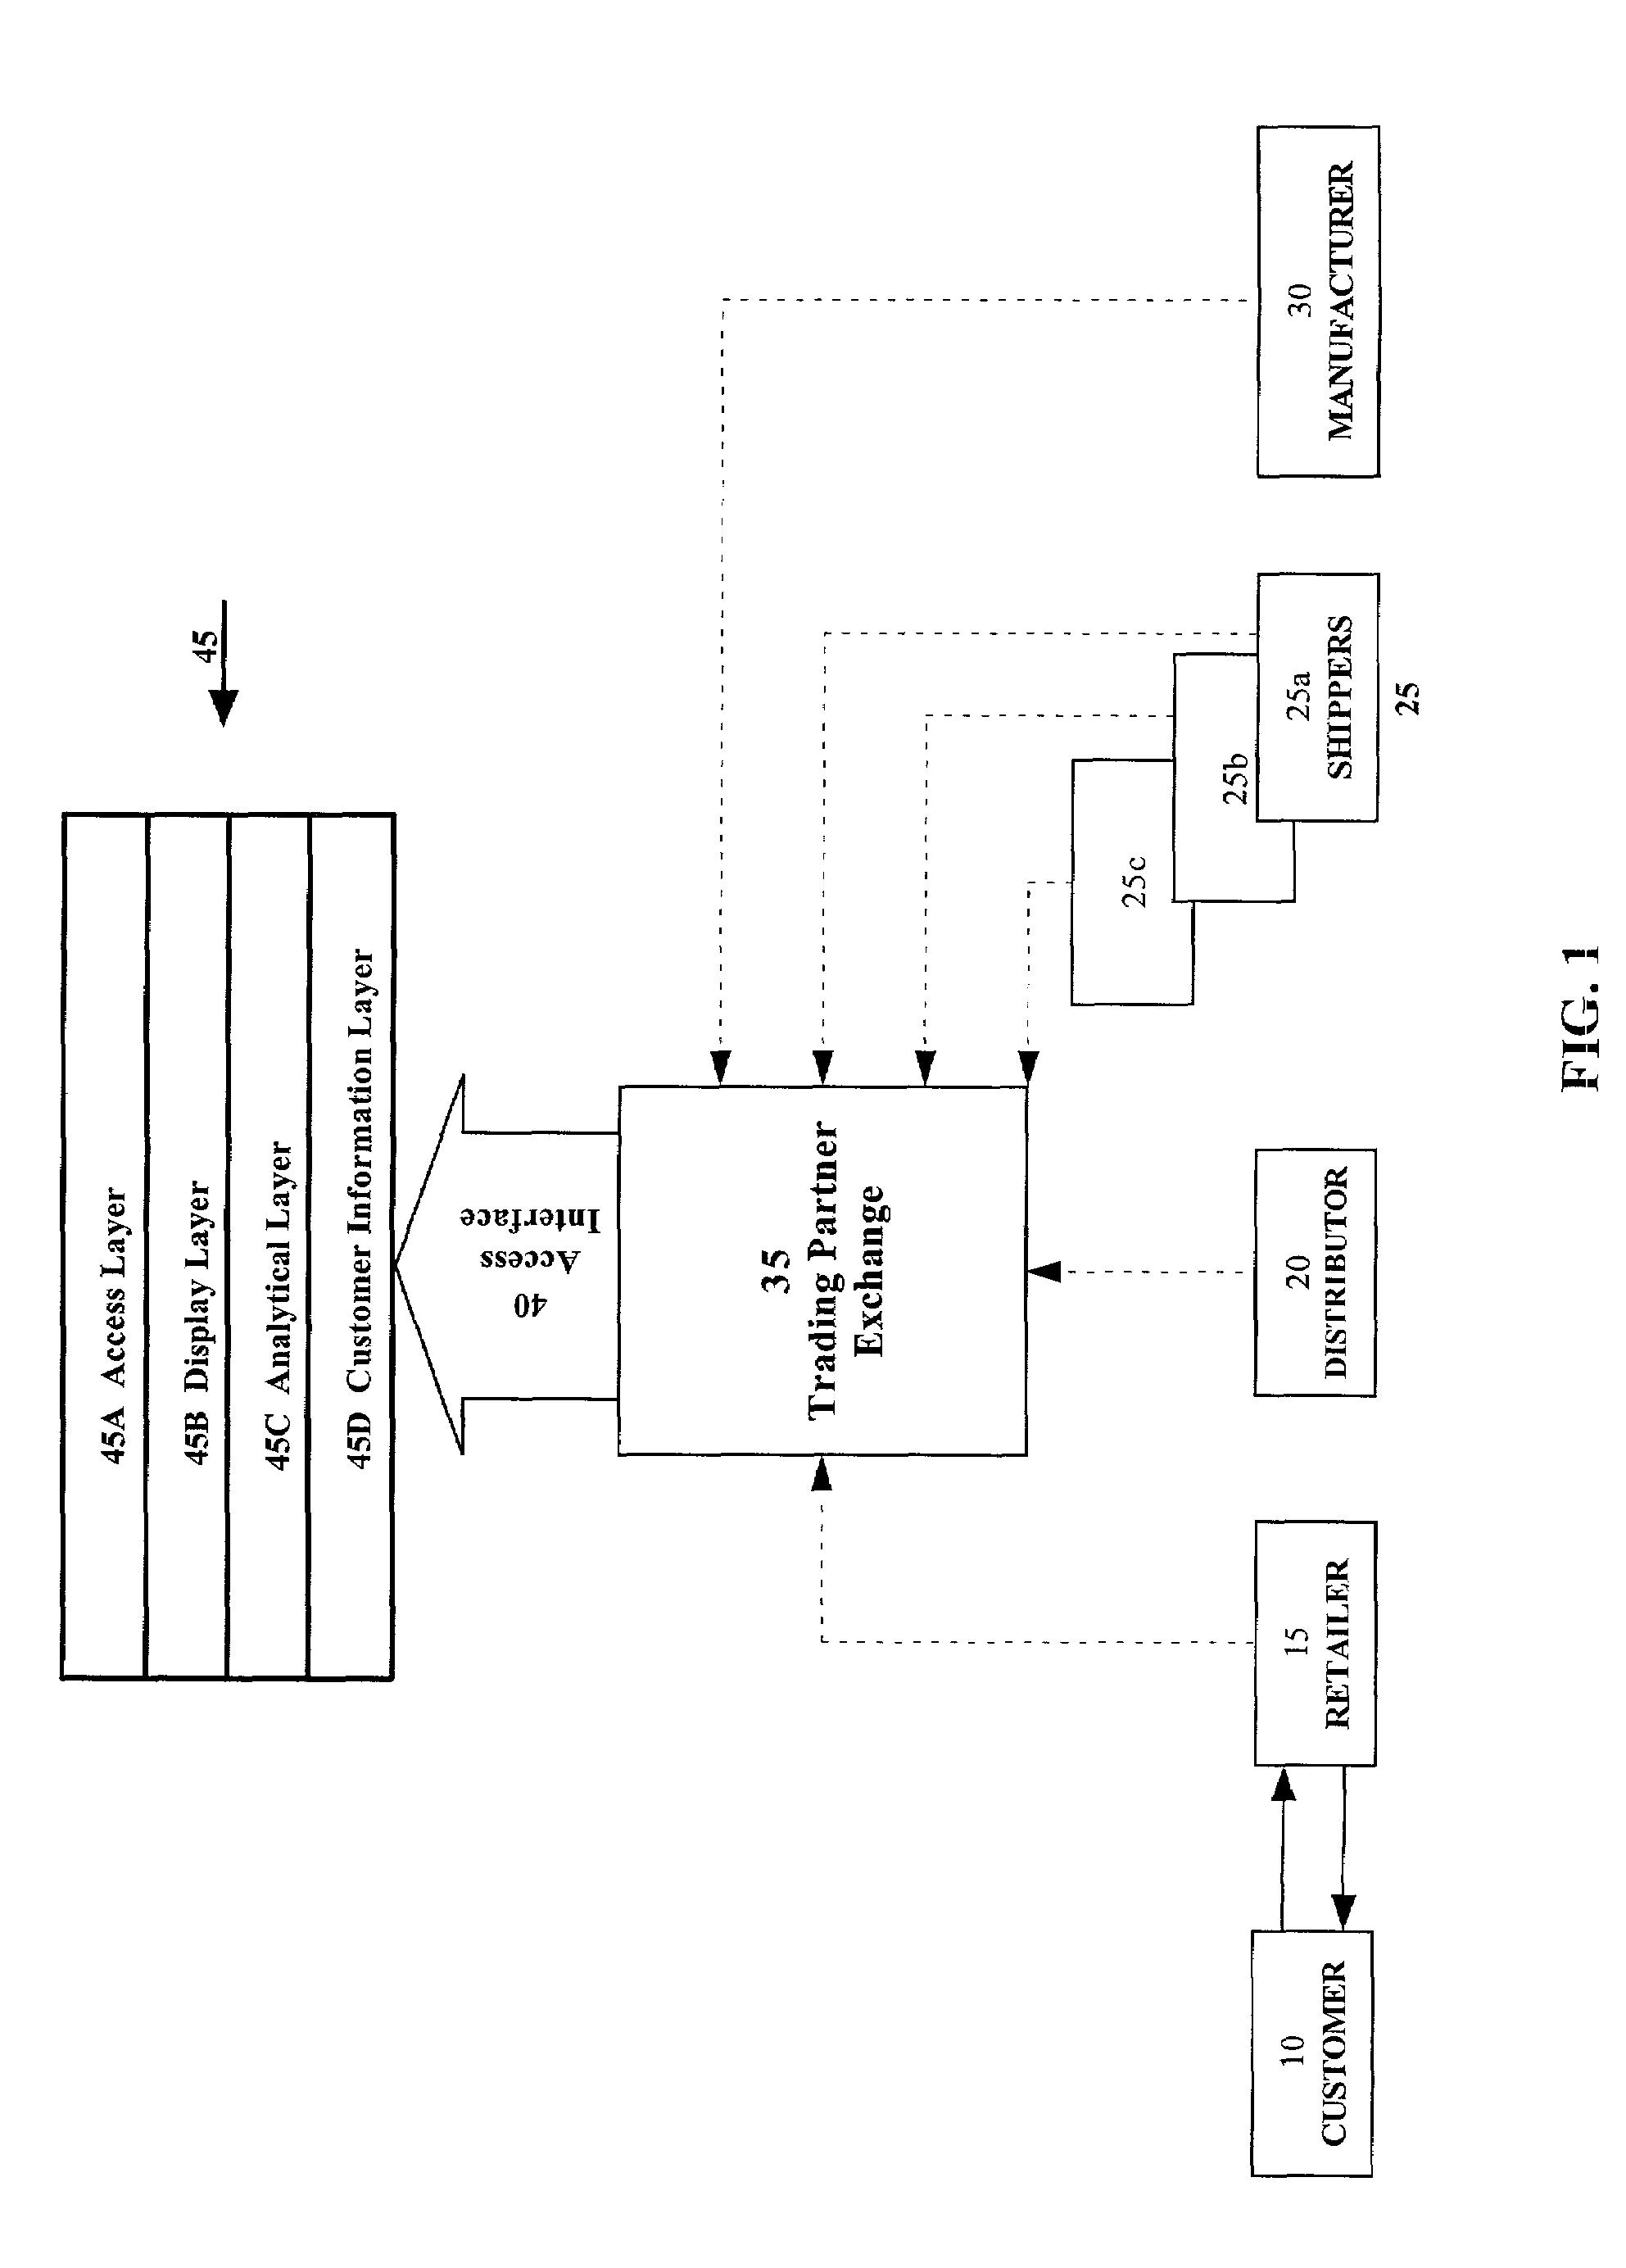 Method and apparatus for creating and exposing order status within a supply chain having disparate systems